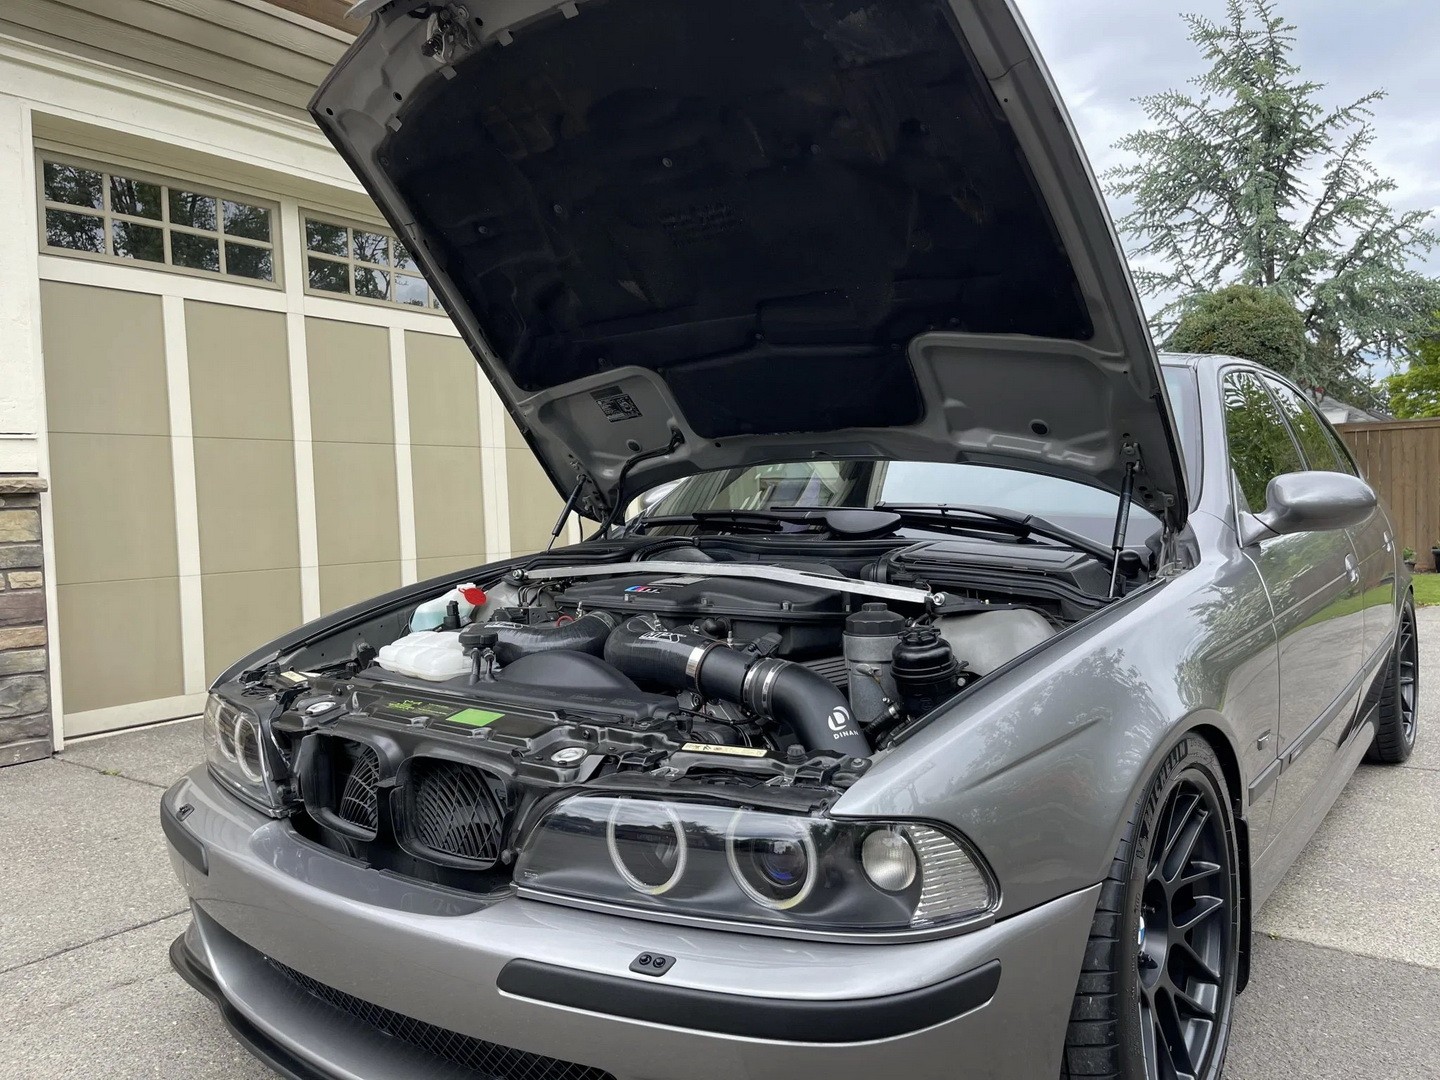 Tuned Supercharged 626whp BMW M5 Touring E39 —